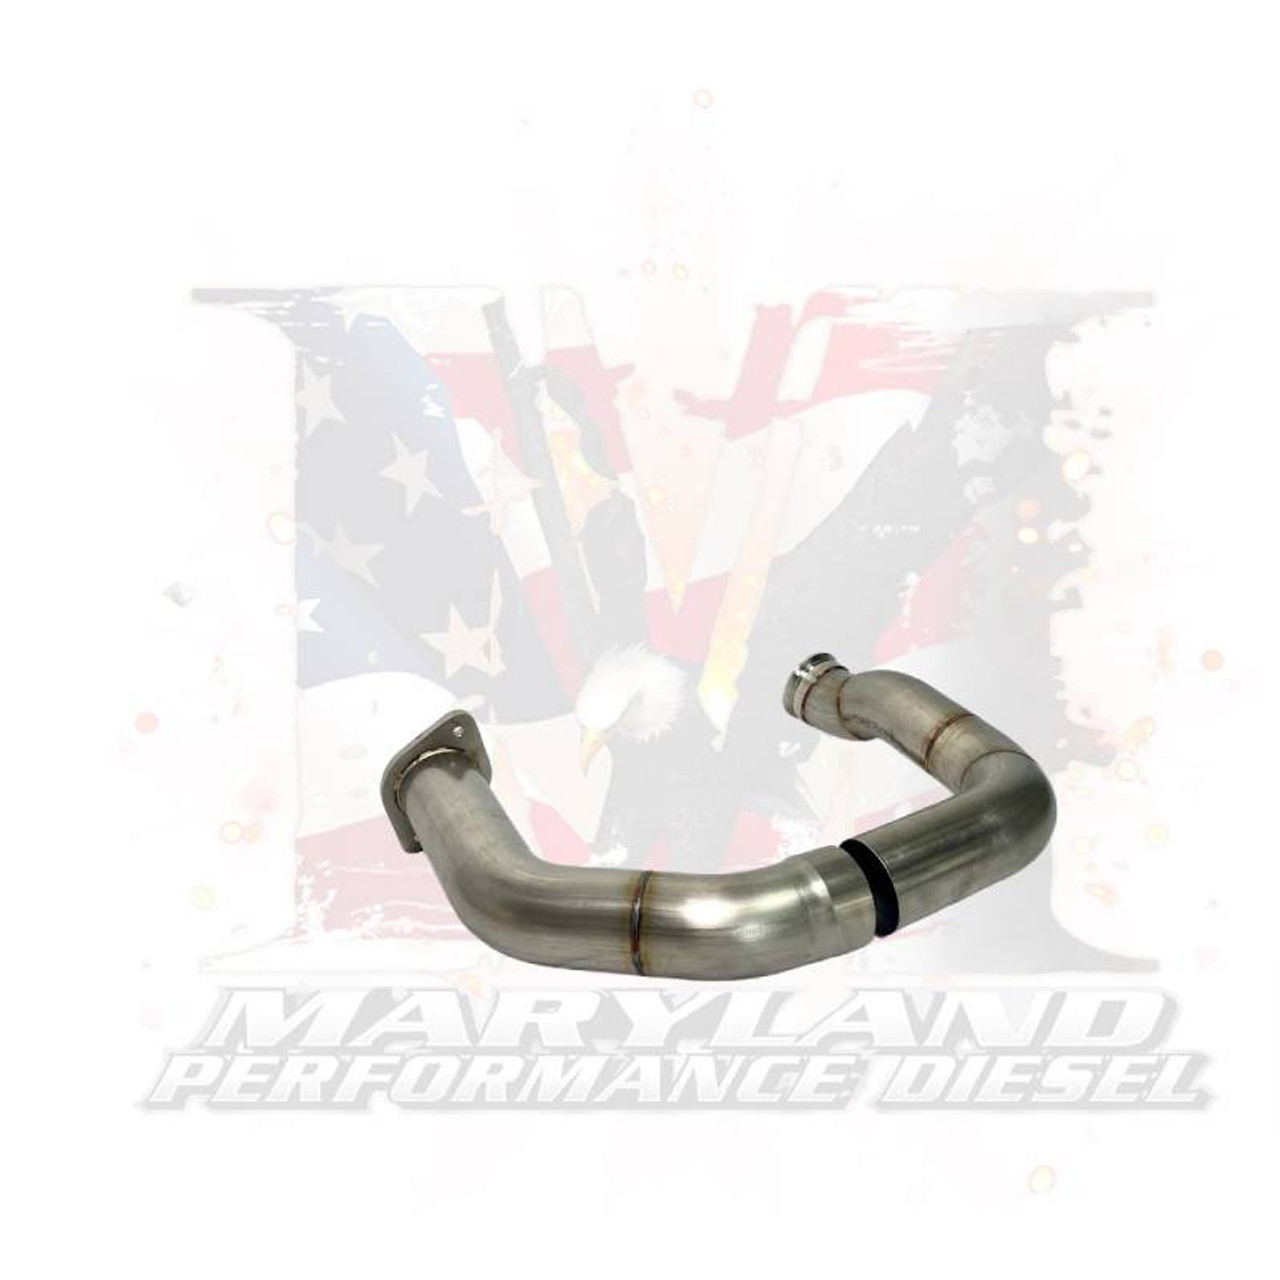 MPD Compound Kit for 2017 to 2019 Ford 6.7L Powerstroke (MPD-67-PSD-1719-CTK) Downpipe View